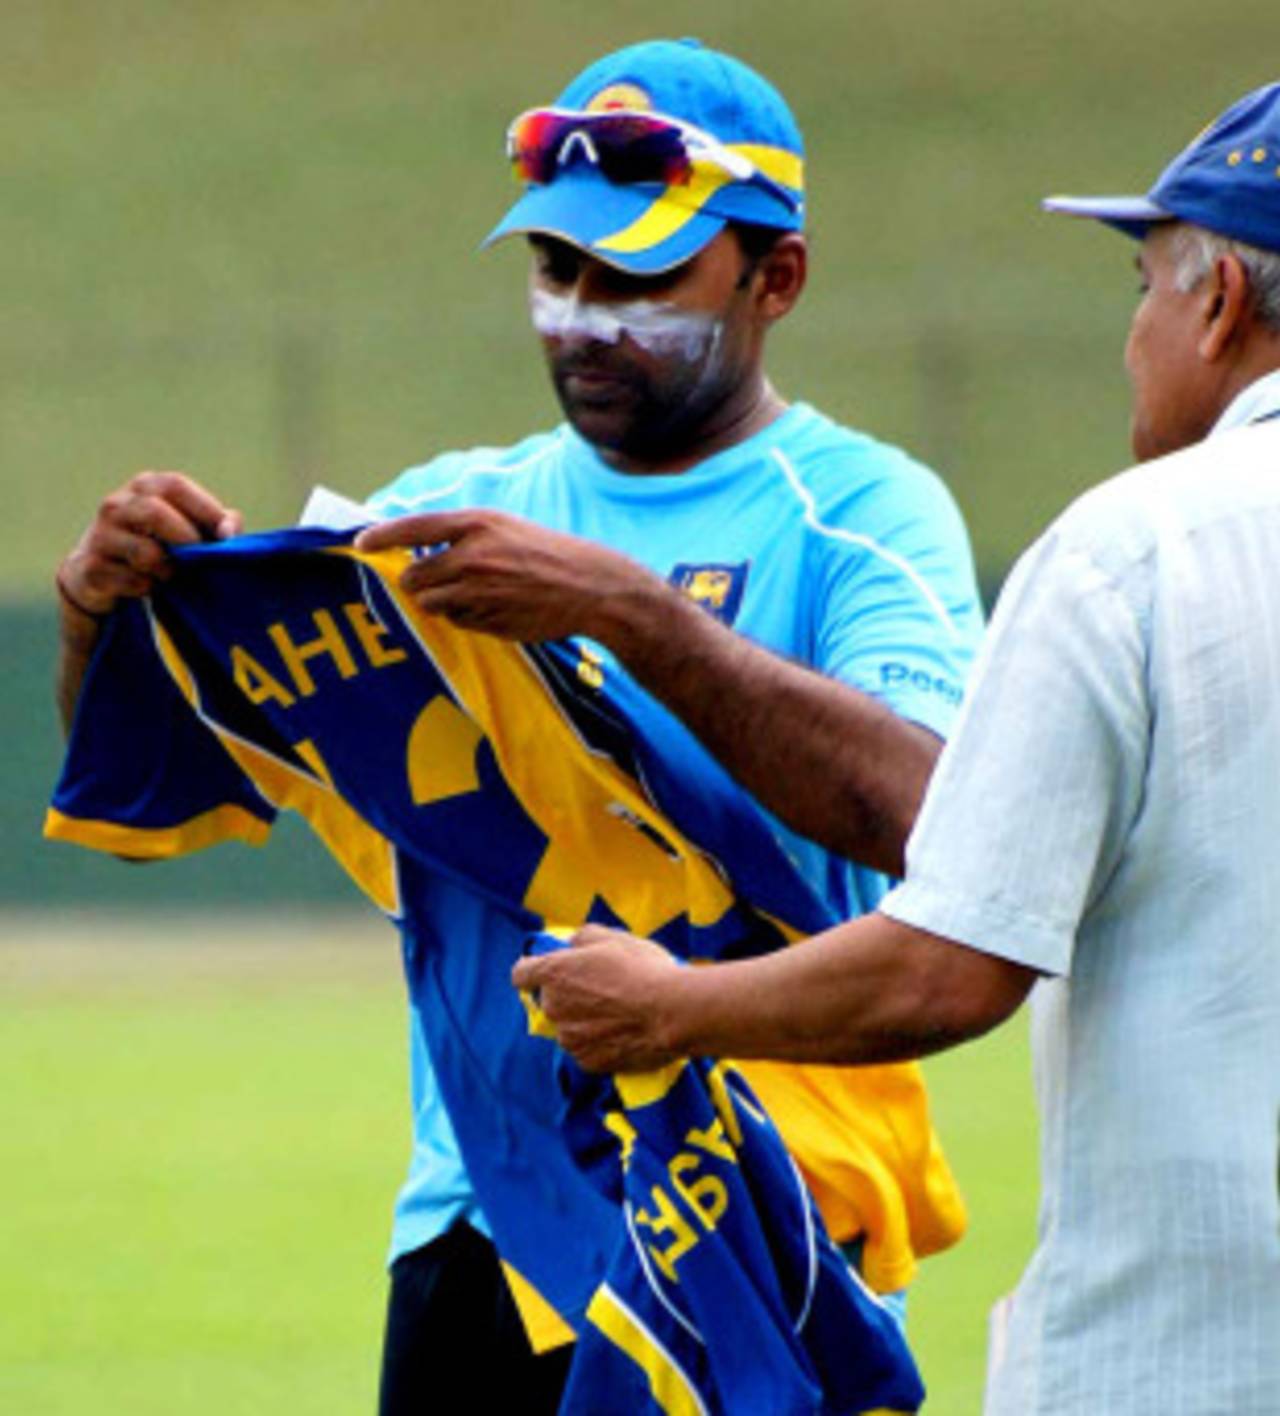 Mahela Jayawardene has a look at a replica of his World Cup jersey during practice, Colombo, February 9, 2011